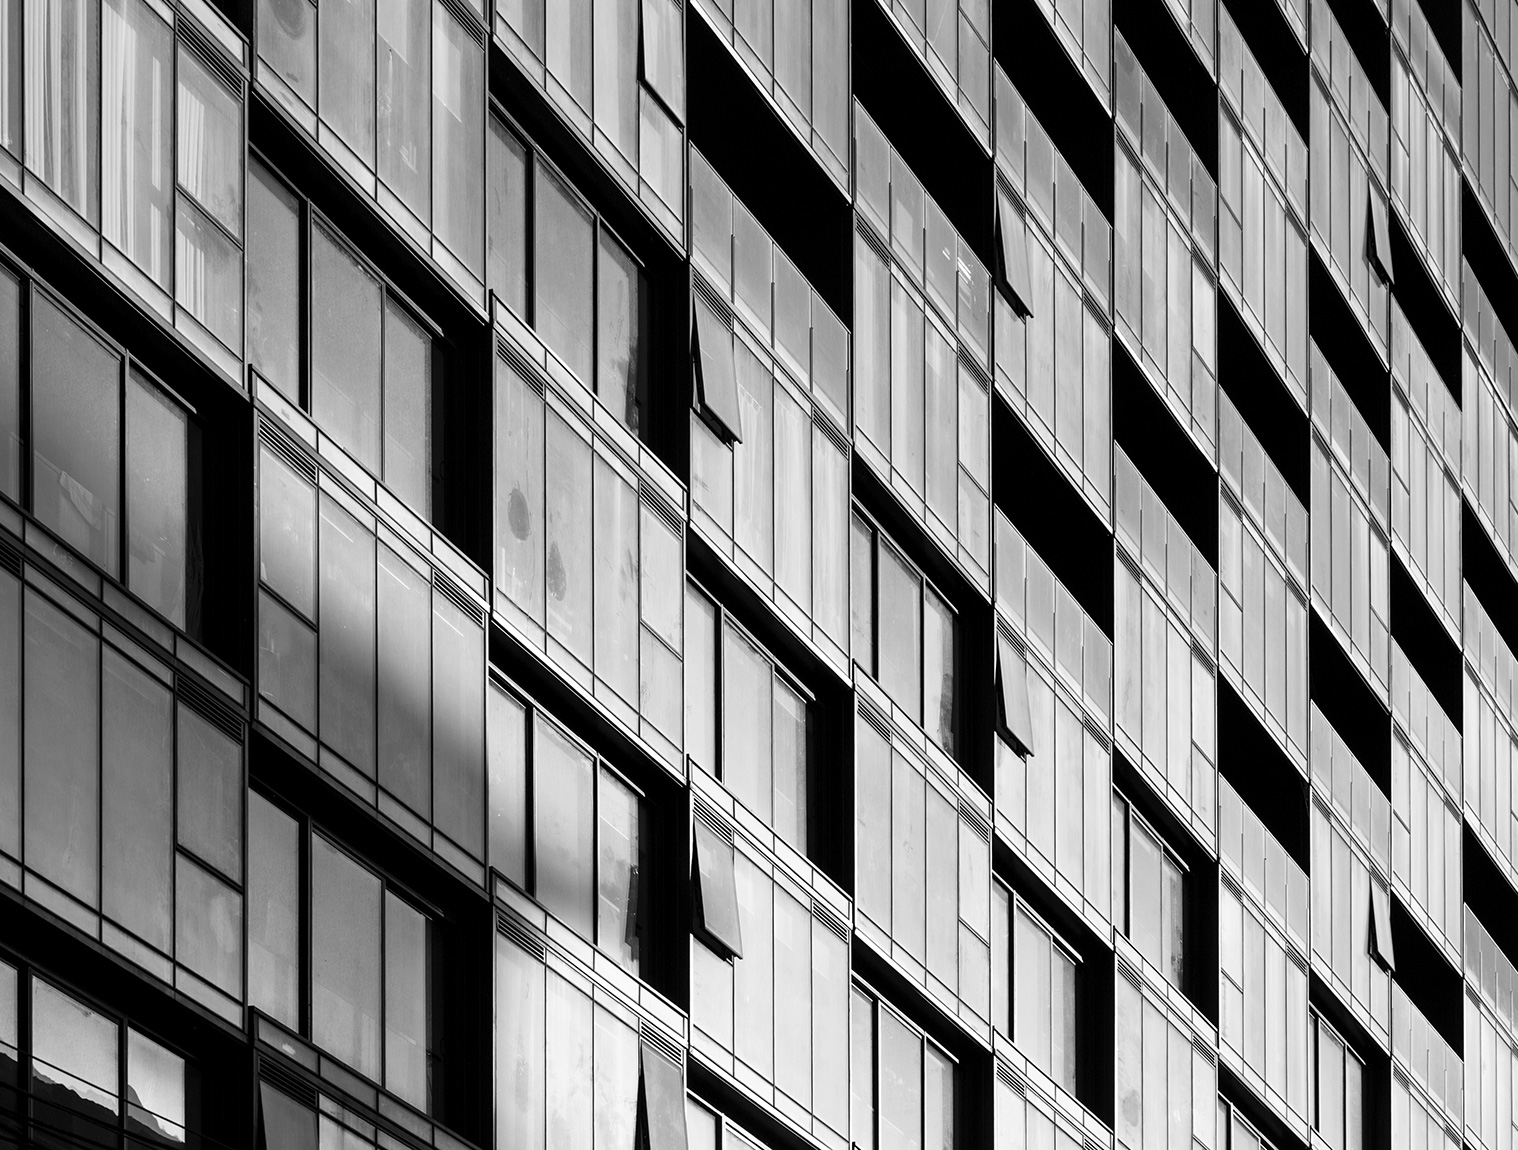 20160621. The abstract yet patent facade of the Thompson Residen